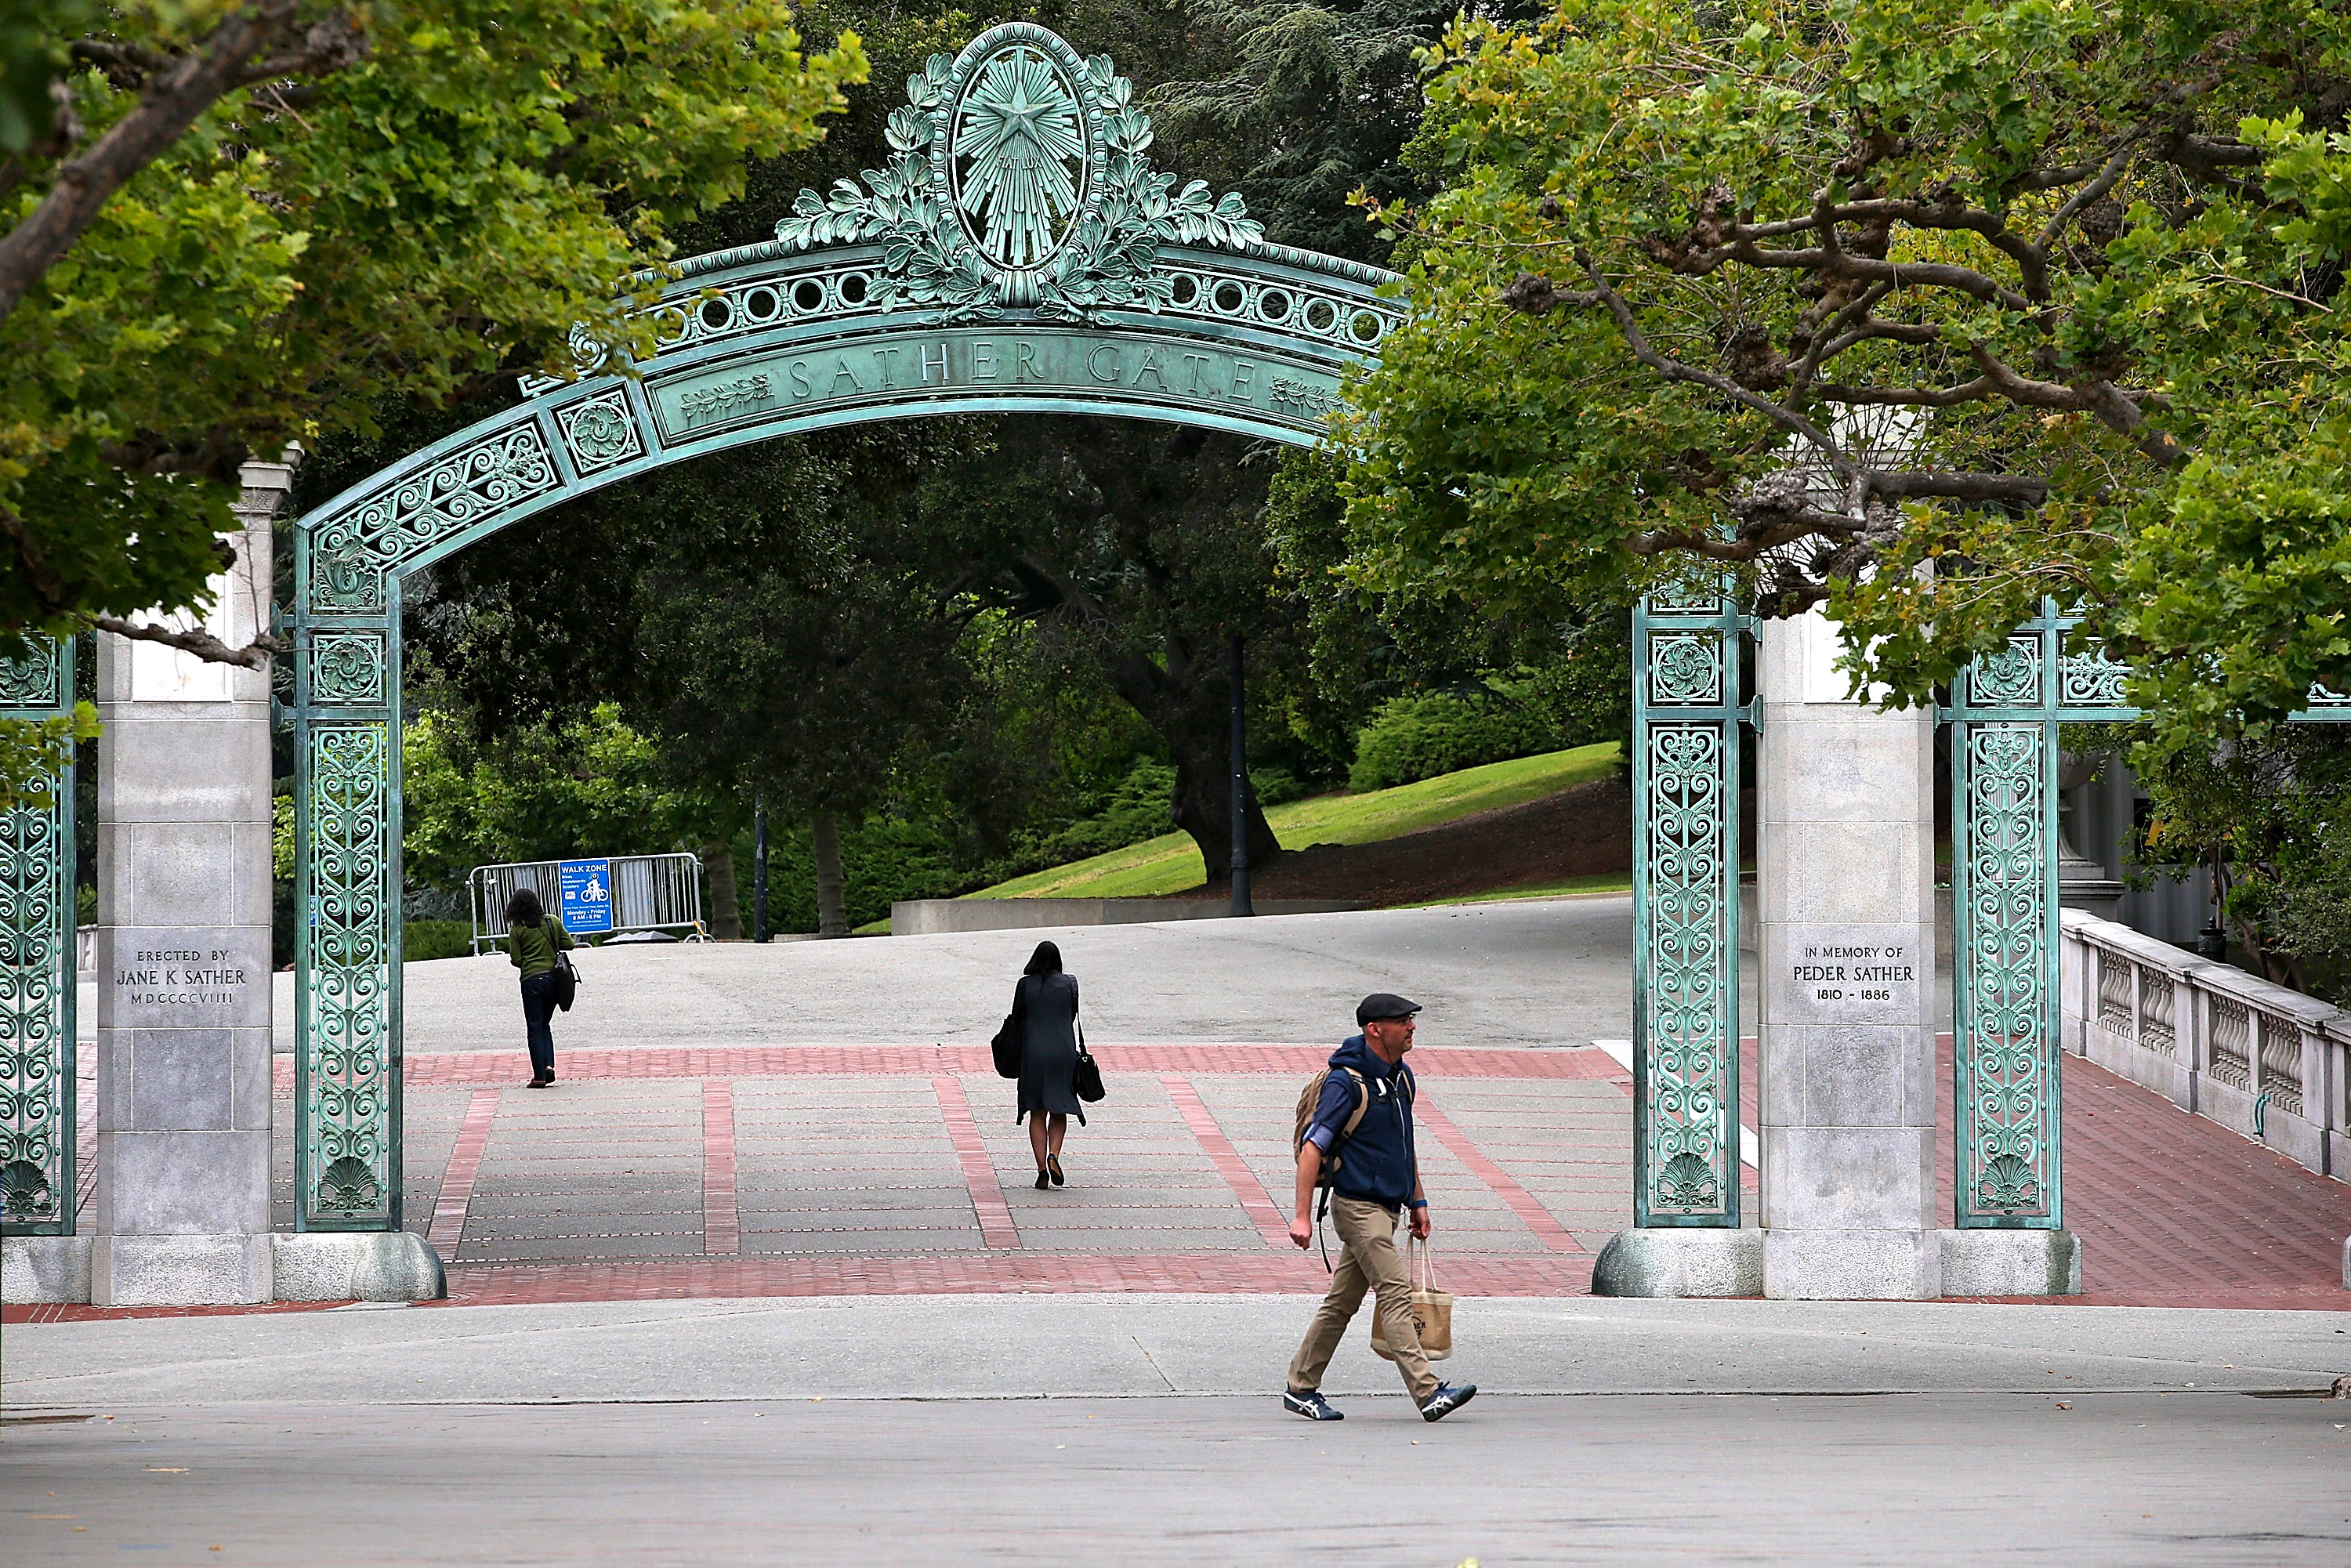 Pedestrians walk by Sather Gate on the UC Berkeley campus on May 22, 2014 in Berkeley, California. (Justin Sullivan—Getty Images)